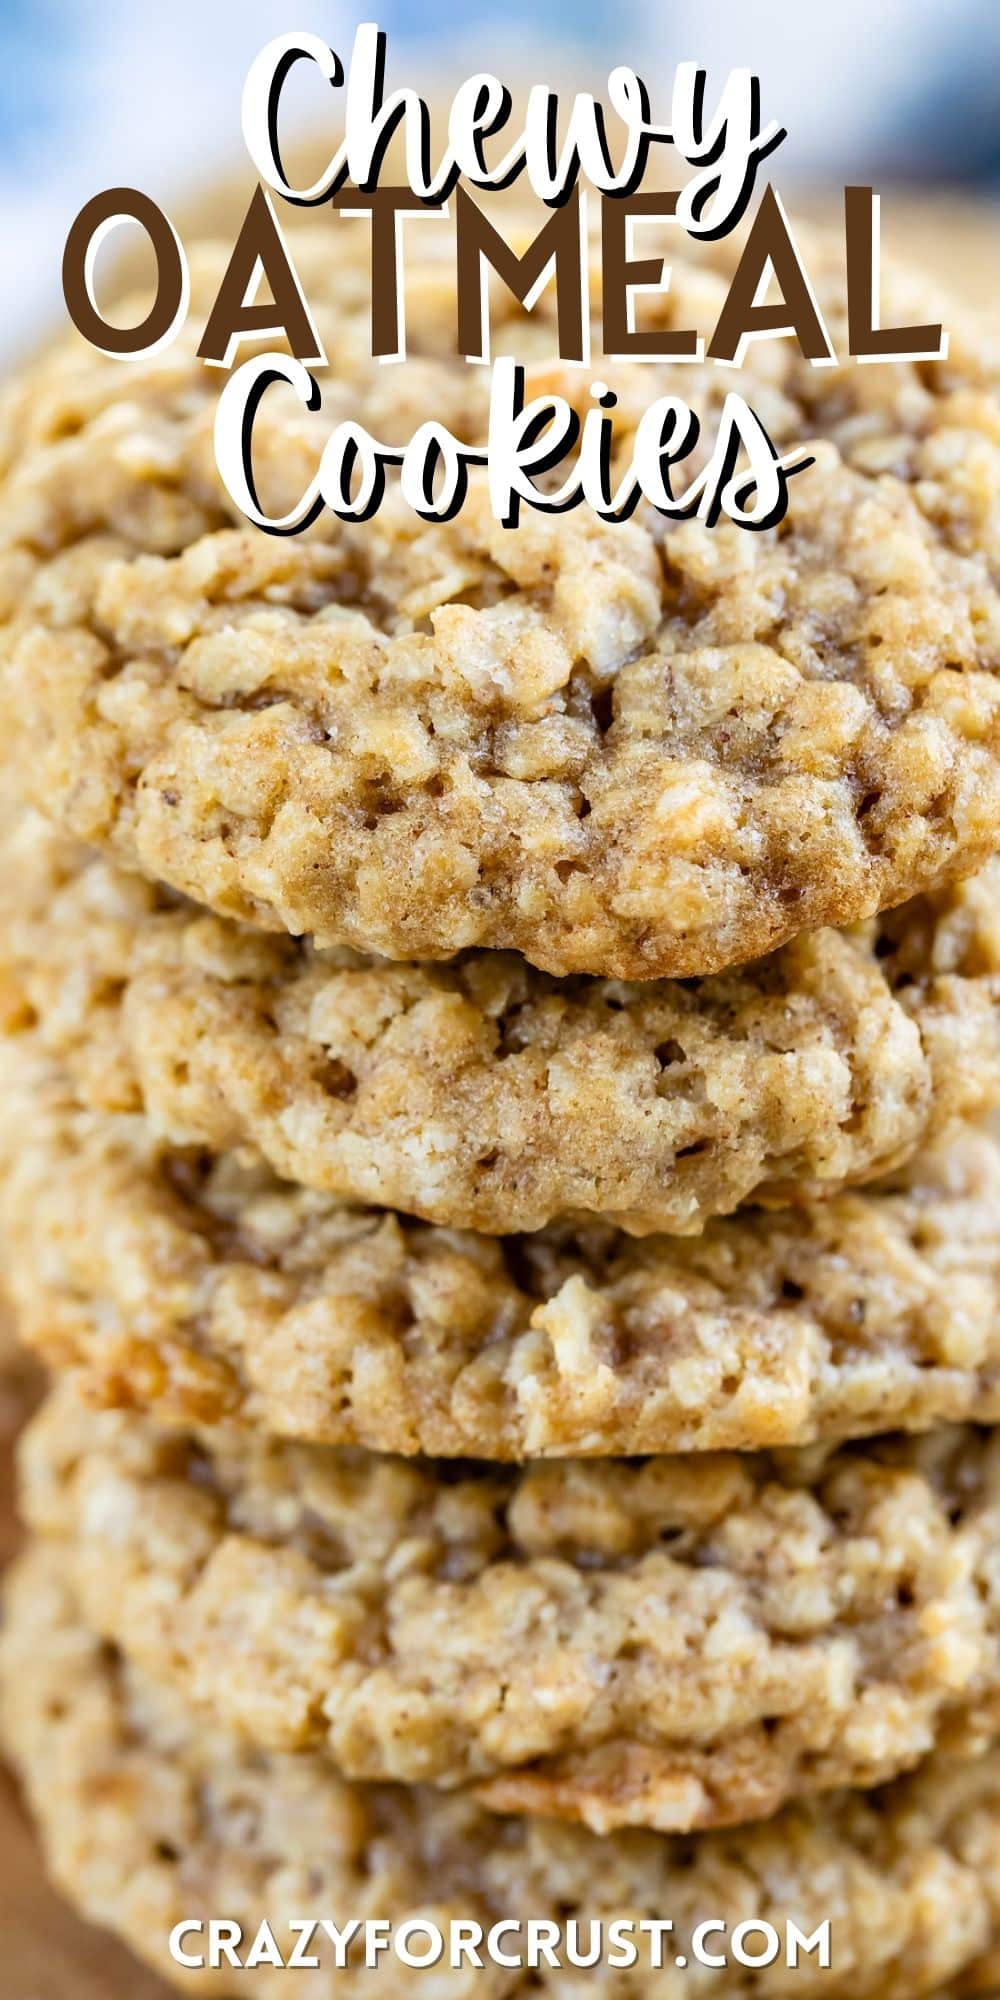 stacked oatmeal cookies with words on the image